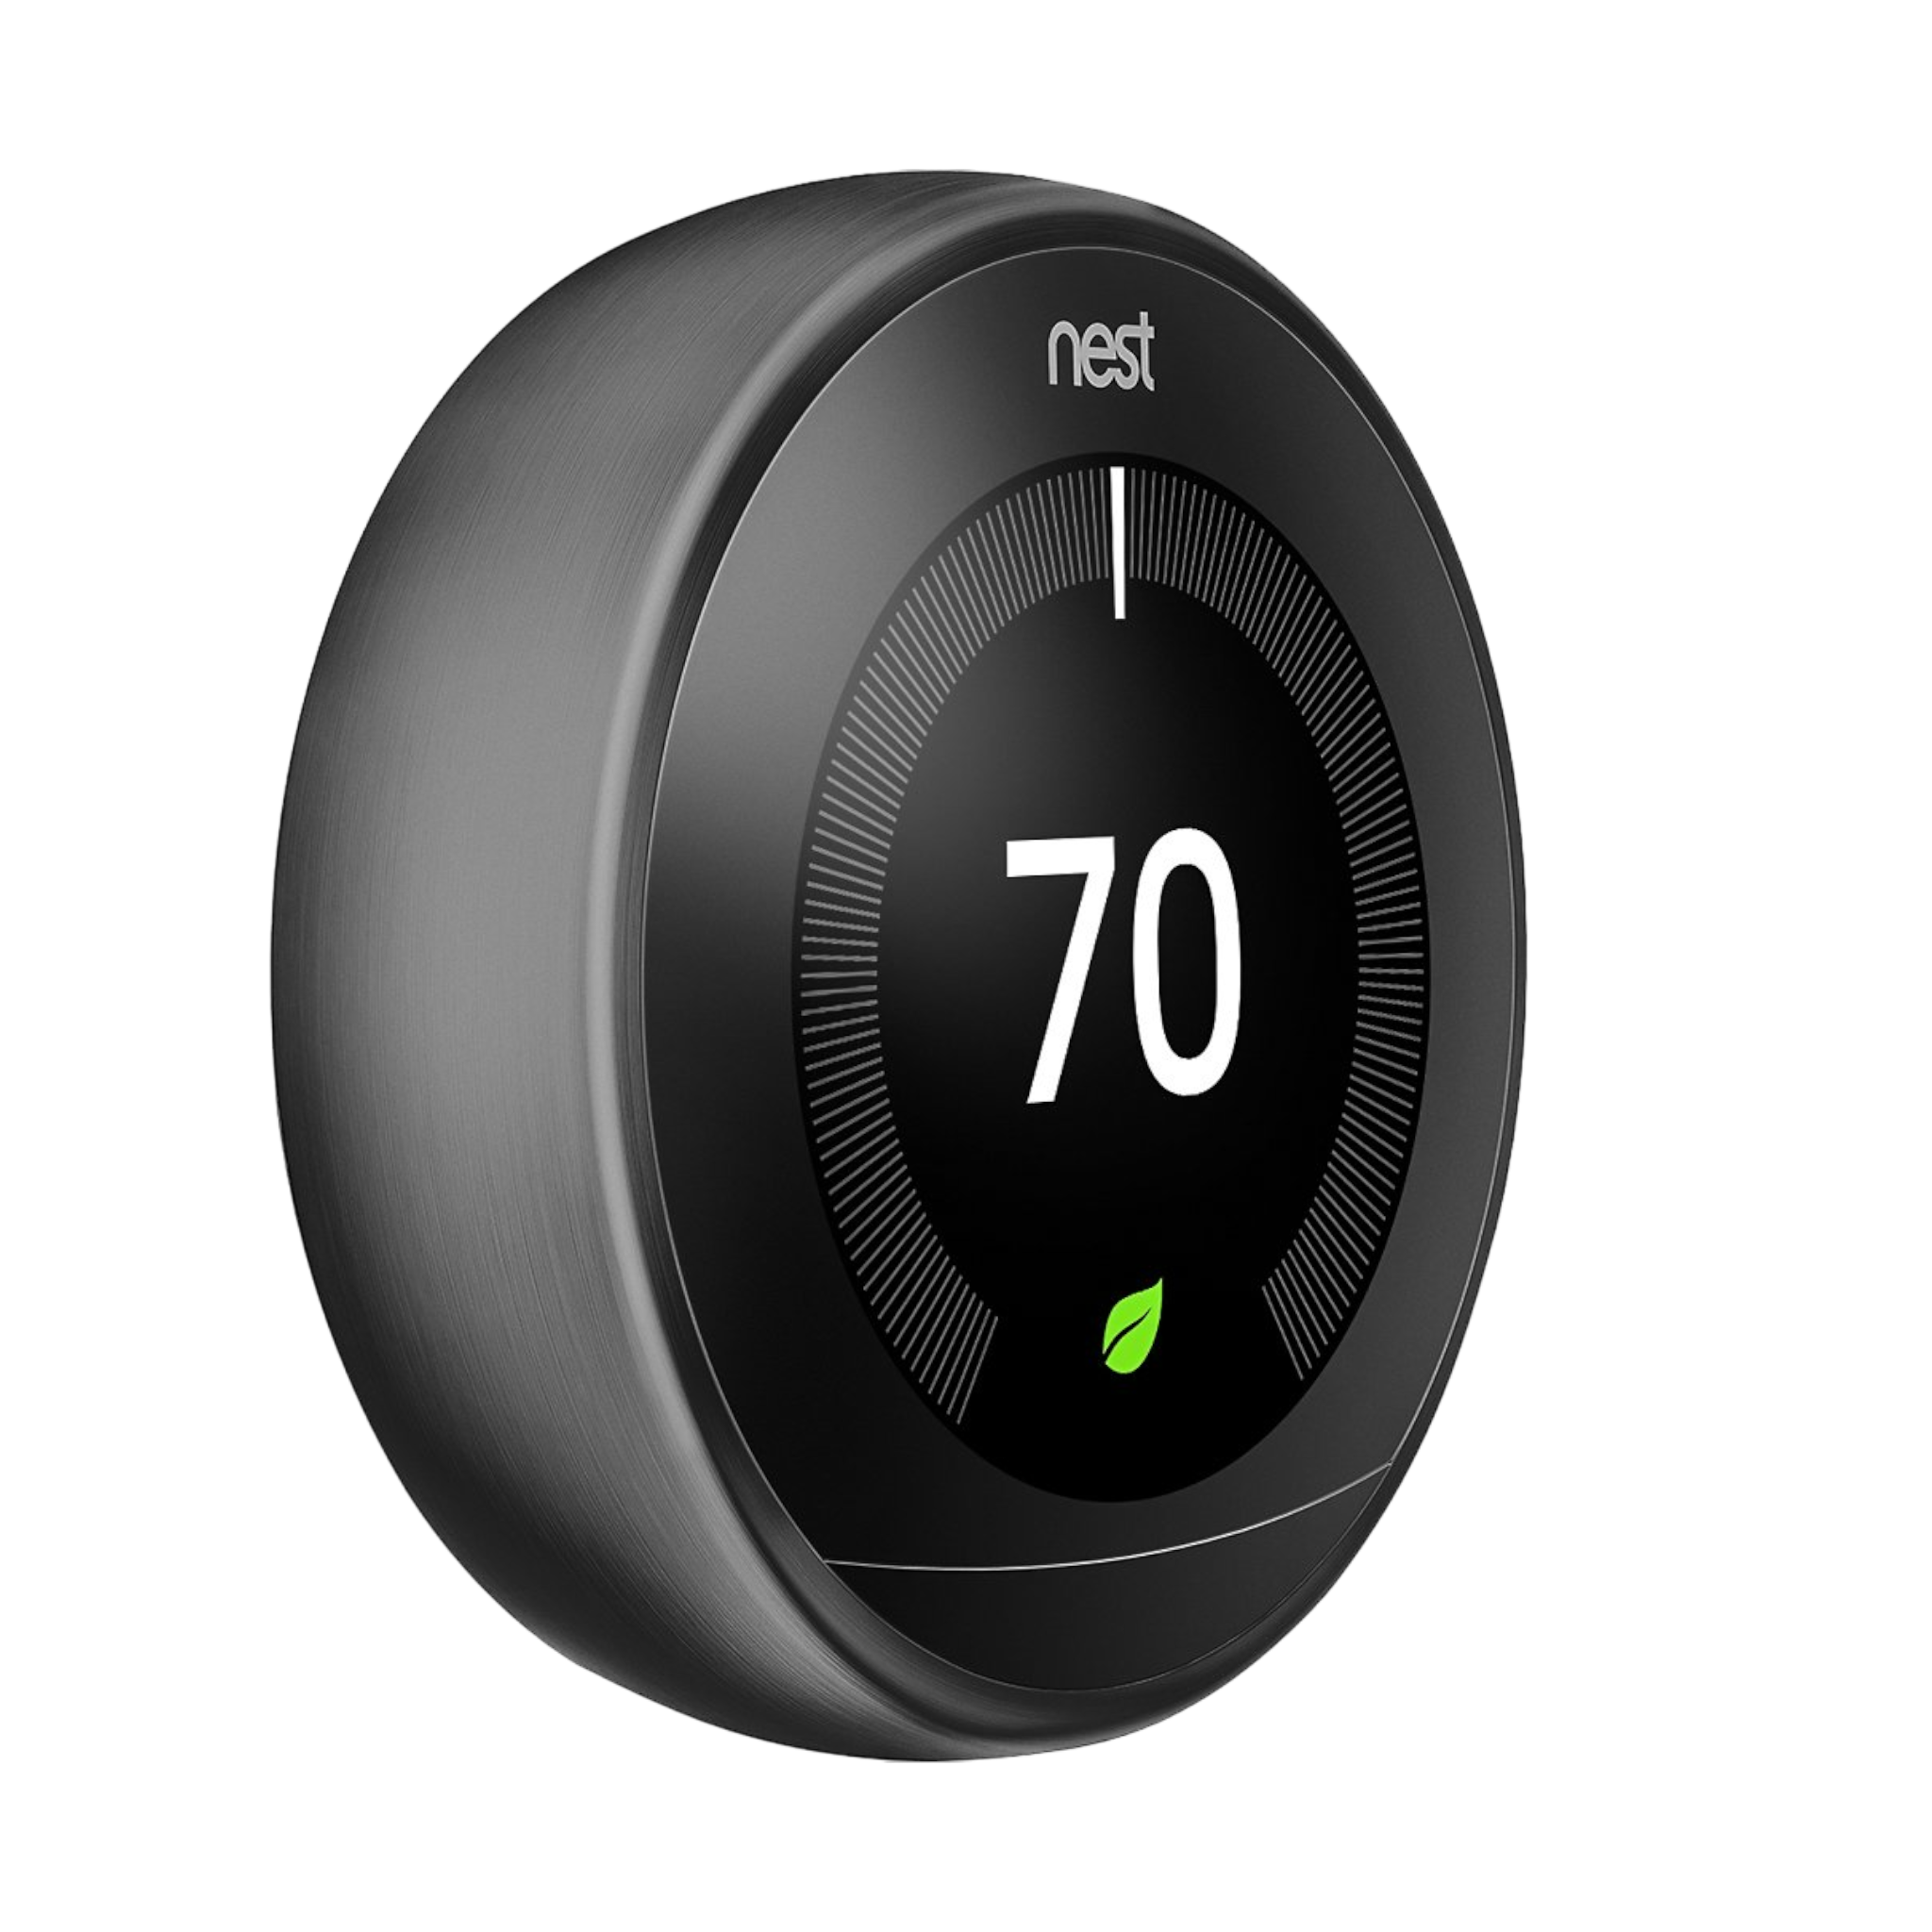 Nest Learning Thermostat 3rd Generation Smart Home with Wifi Remote Control Mirror Black - Pro-Distributing